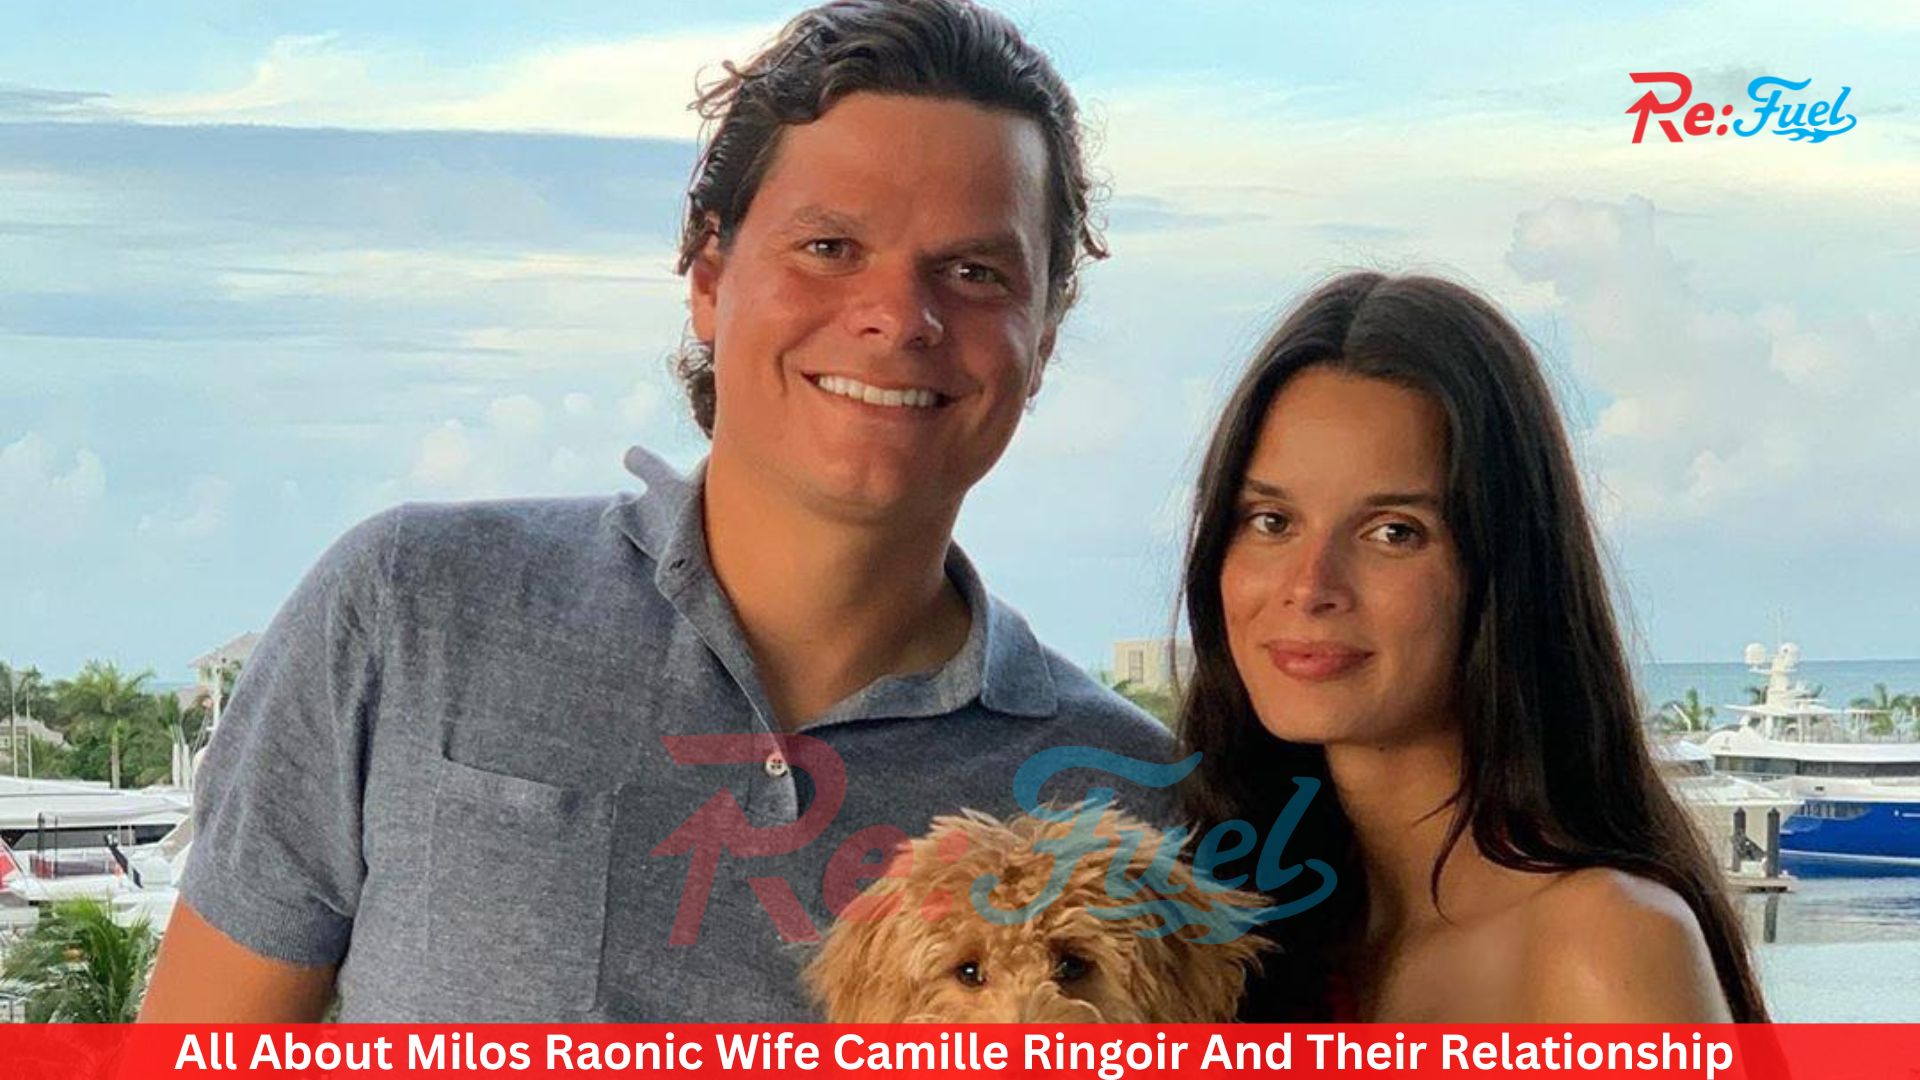 All About Milos Raonic Wife Camille Ringoir And Their Relationship